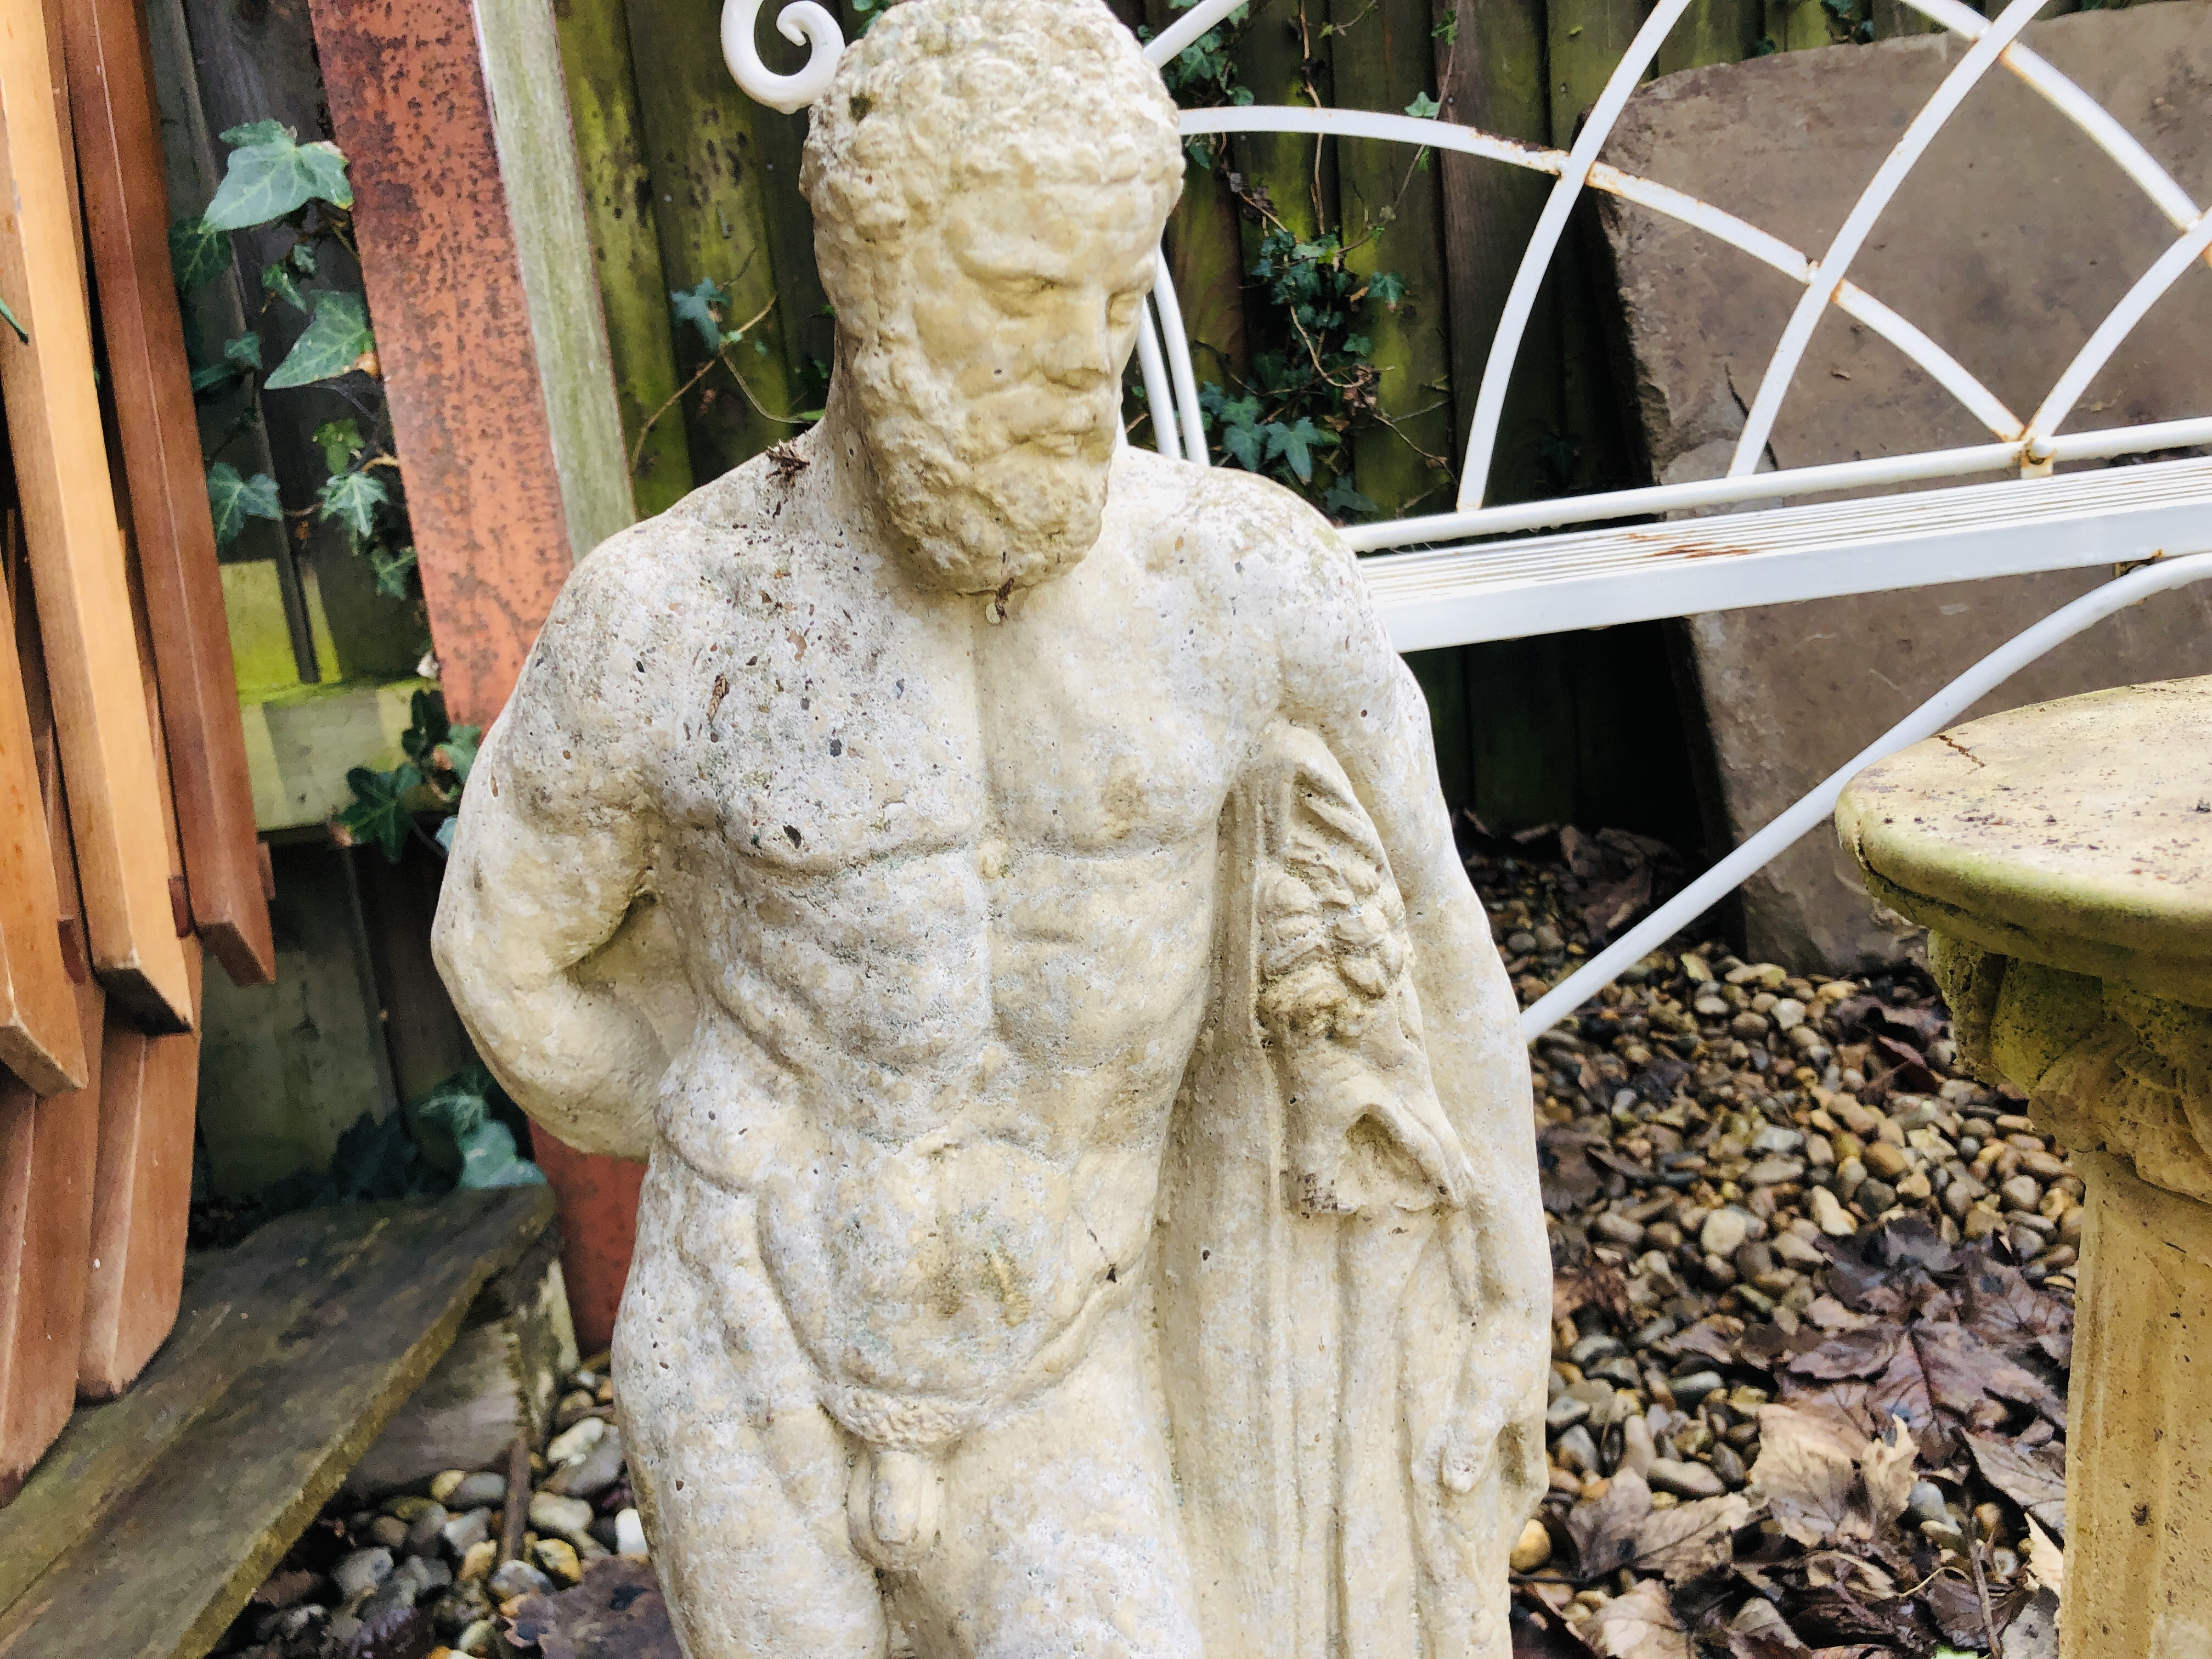 A SCULPTURE OF A CLASSICAL GREEK MAN ALONG WITH A STONE WORK CLASSICAL PEDESTAL - Image 2 of 2